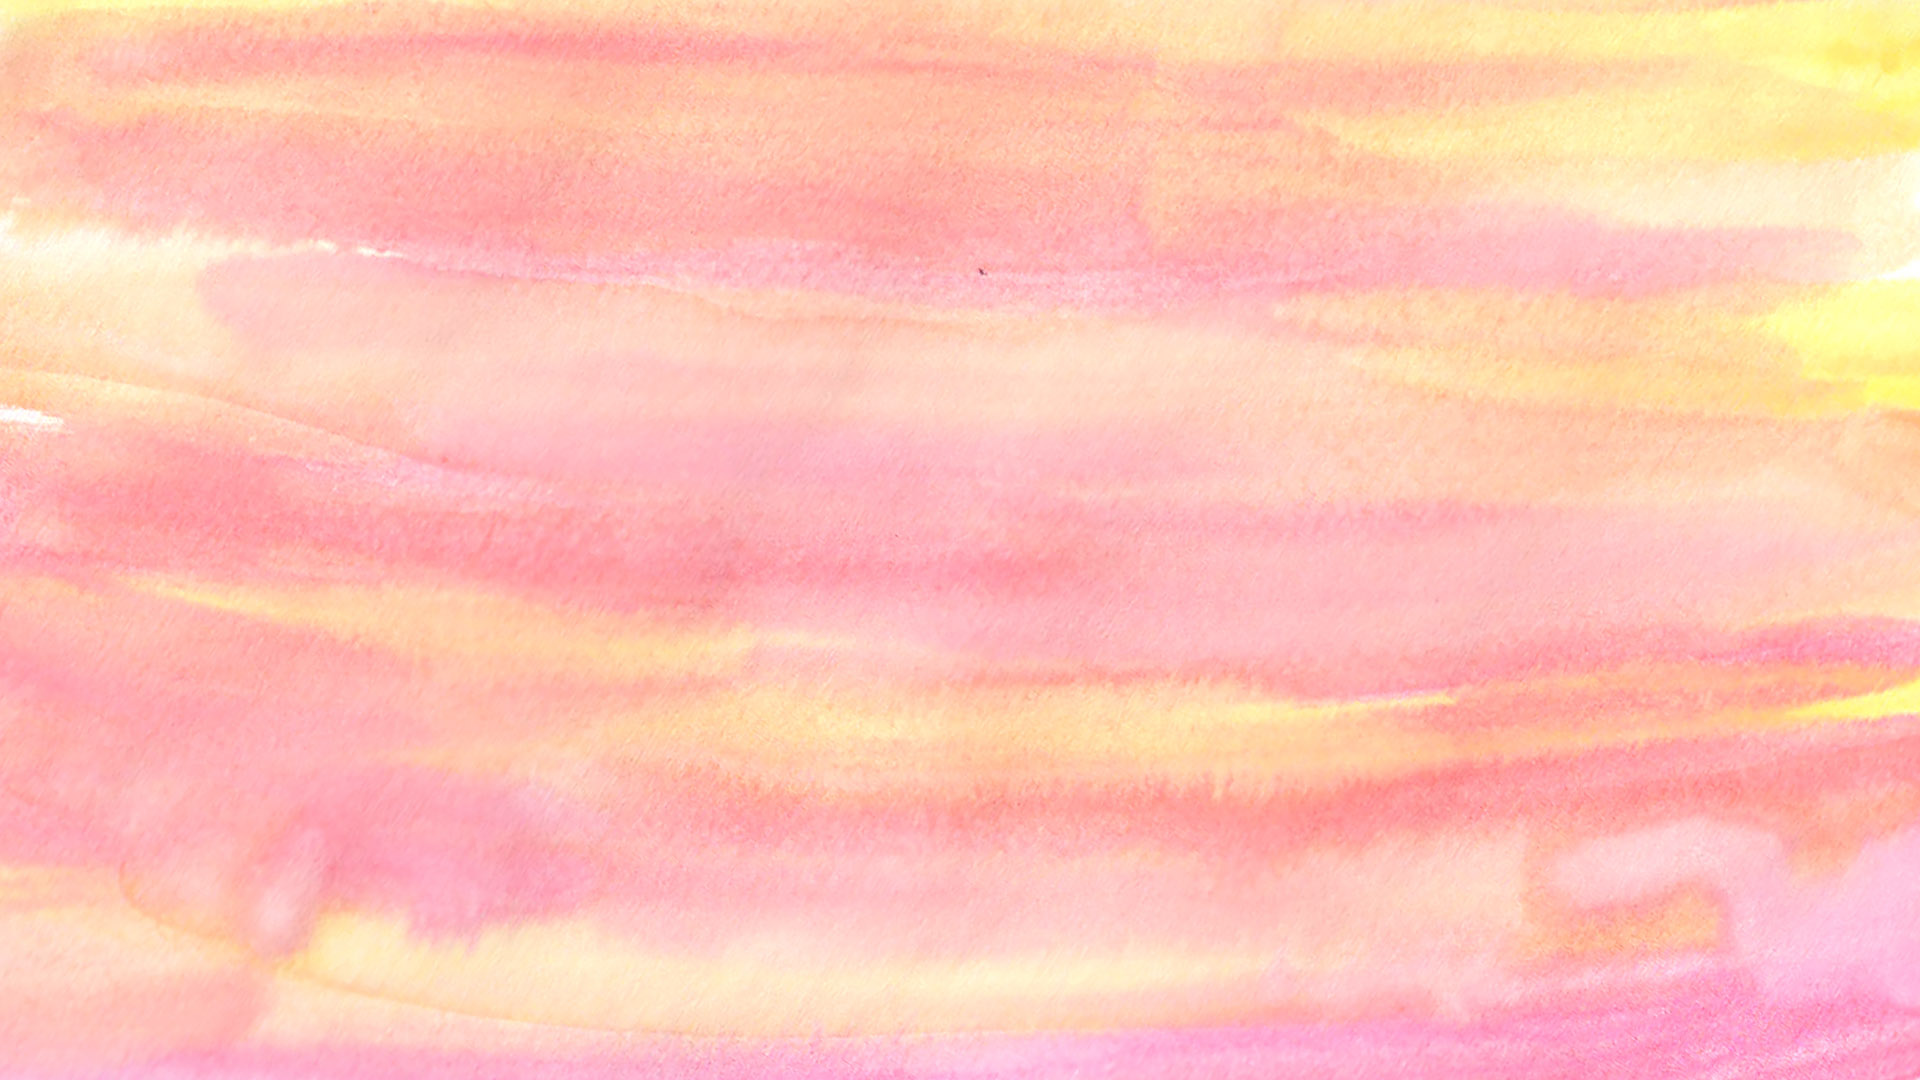 Spring Watercolor Background